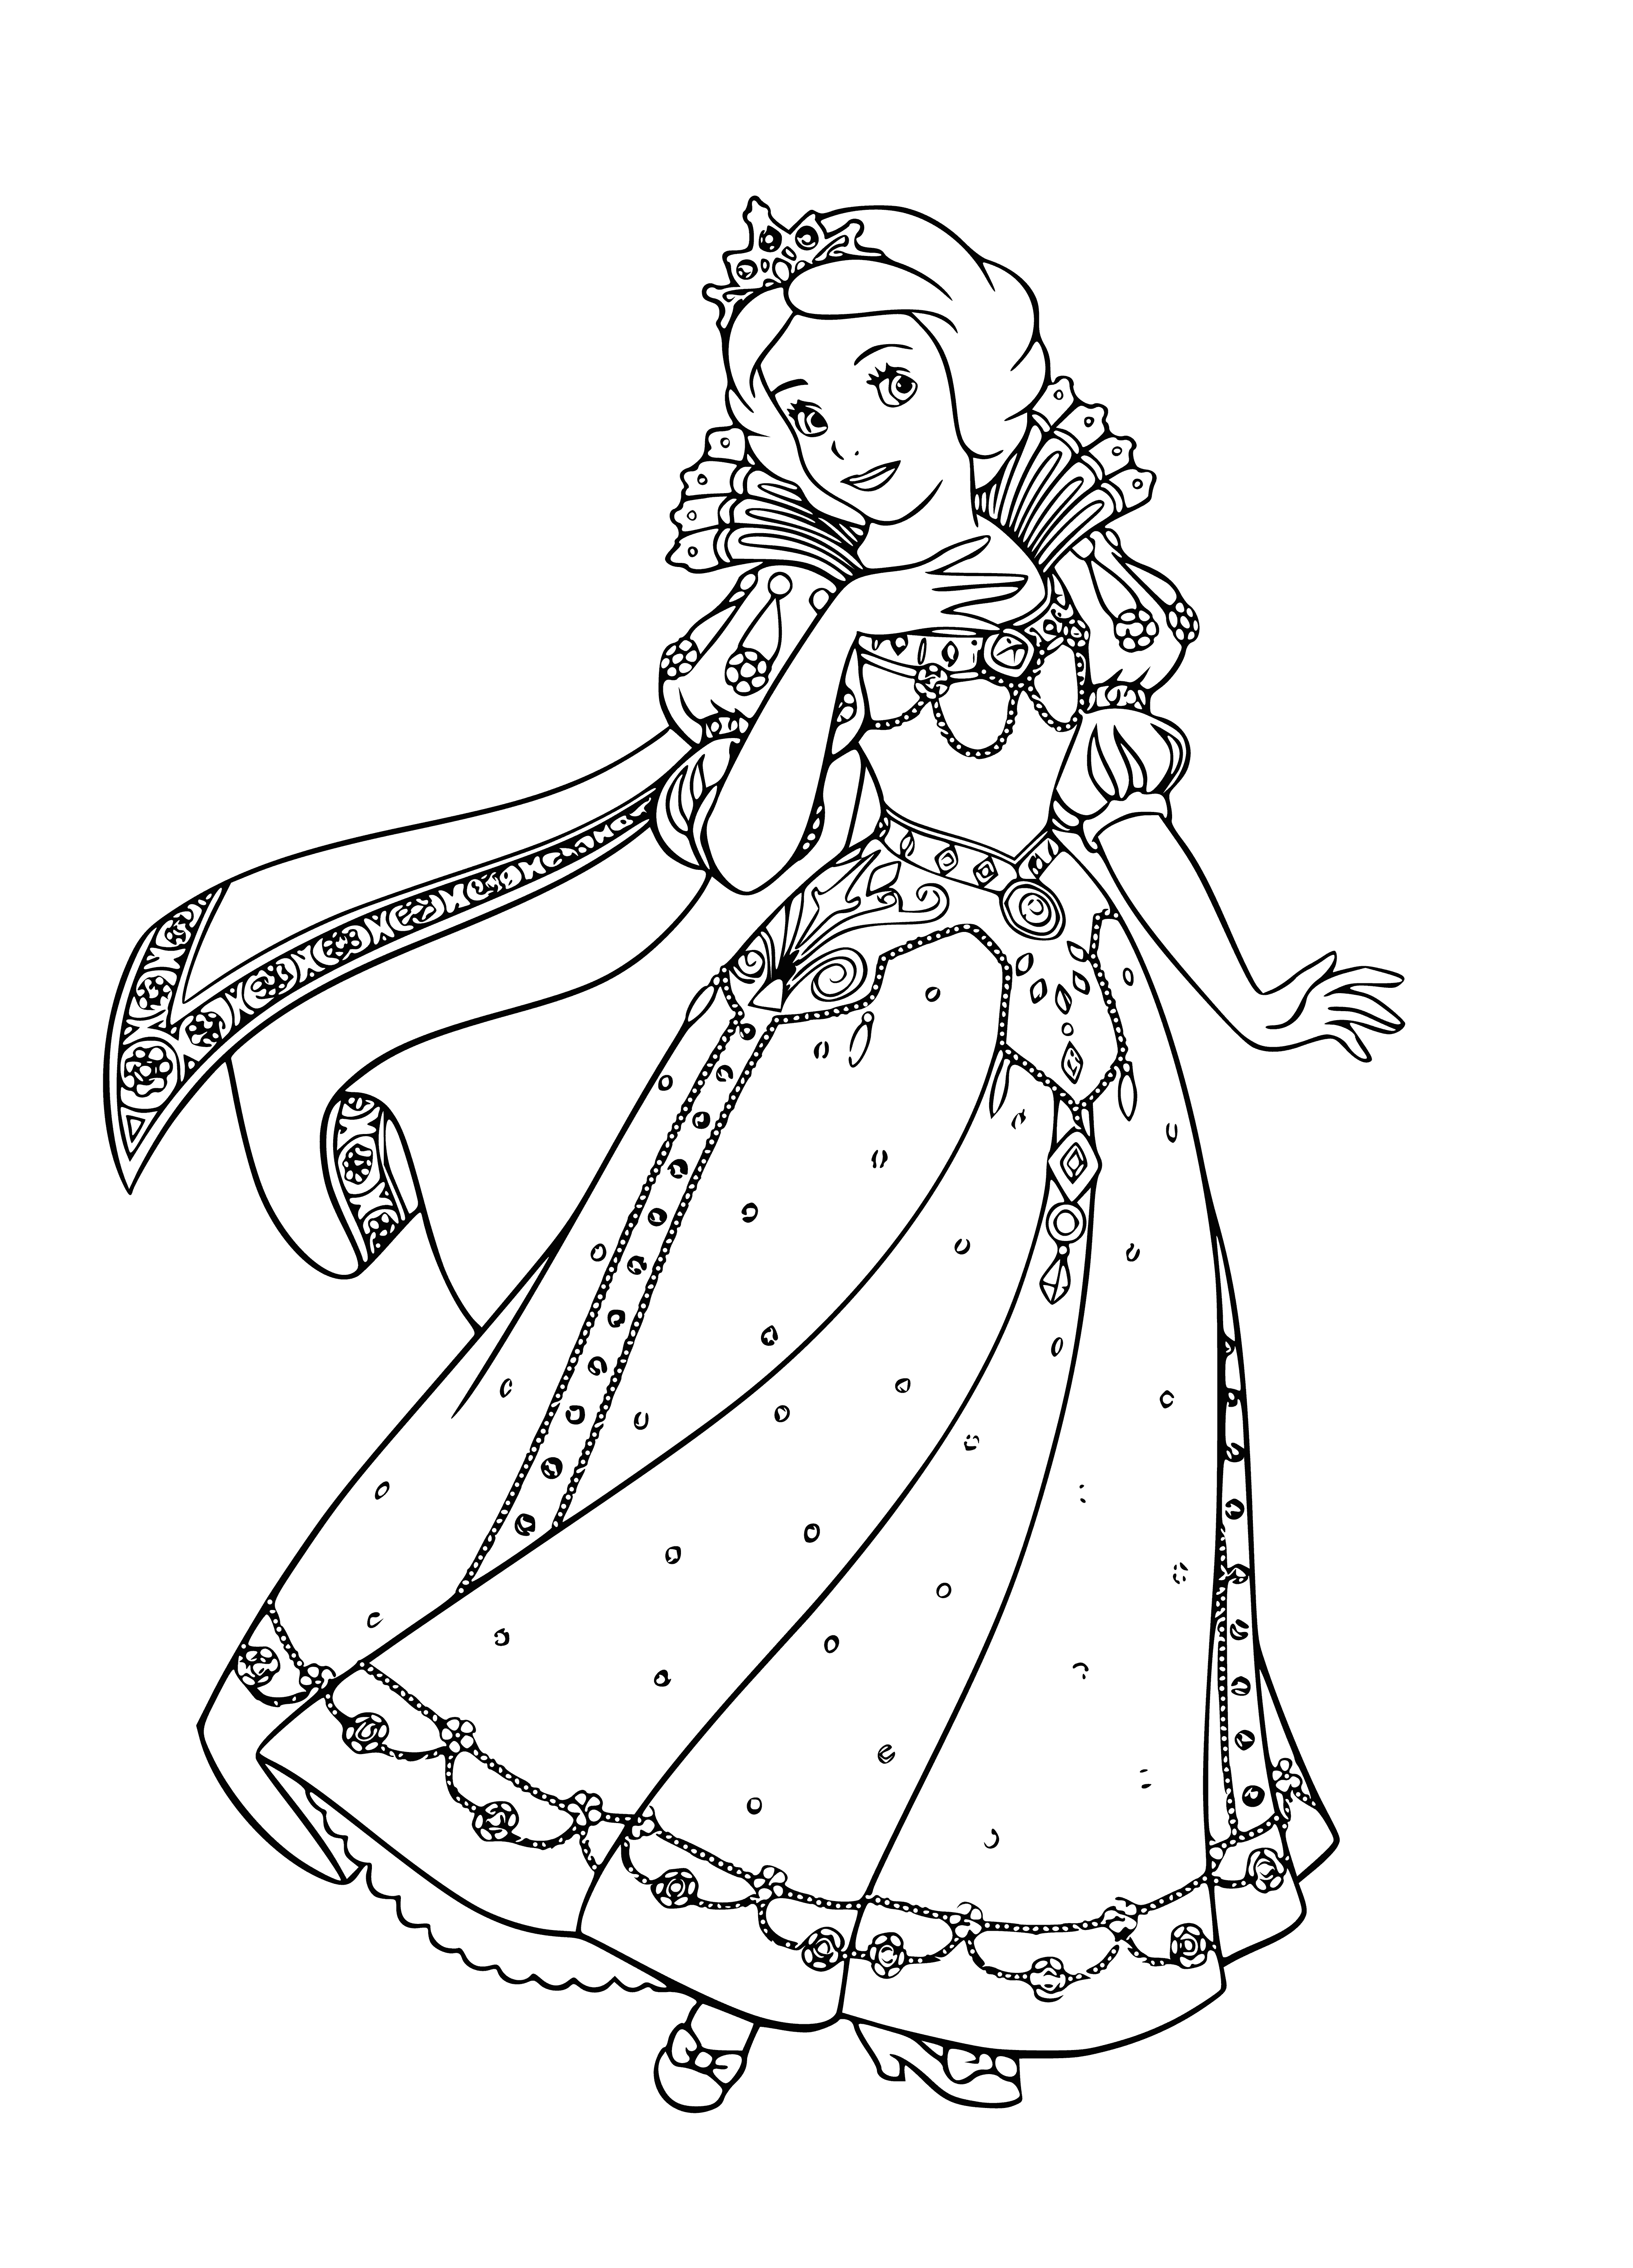 coloring page: Beautiful girl w/ long black hair in woods wearing white dress & red cape, holding basket.